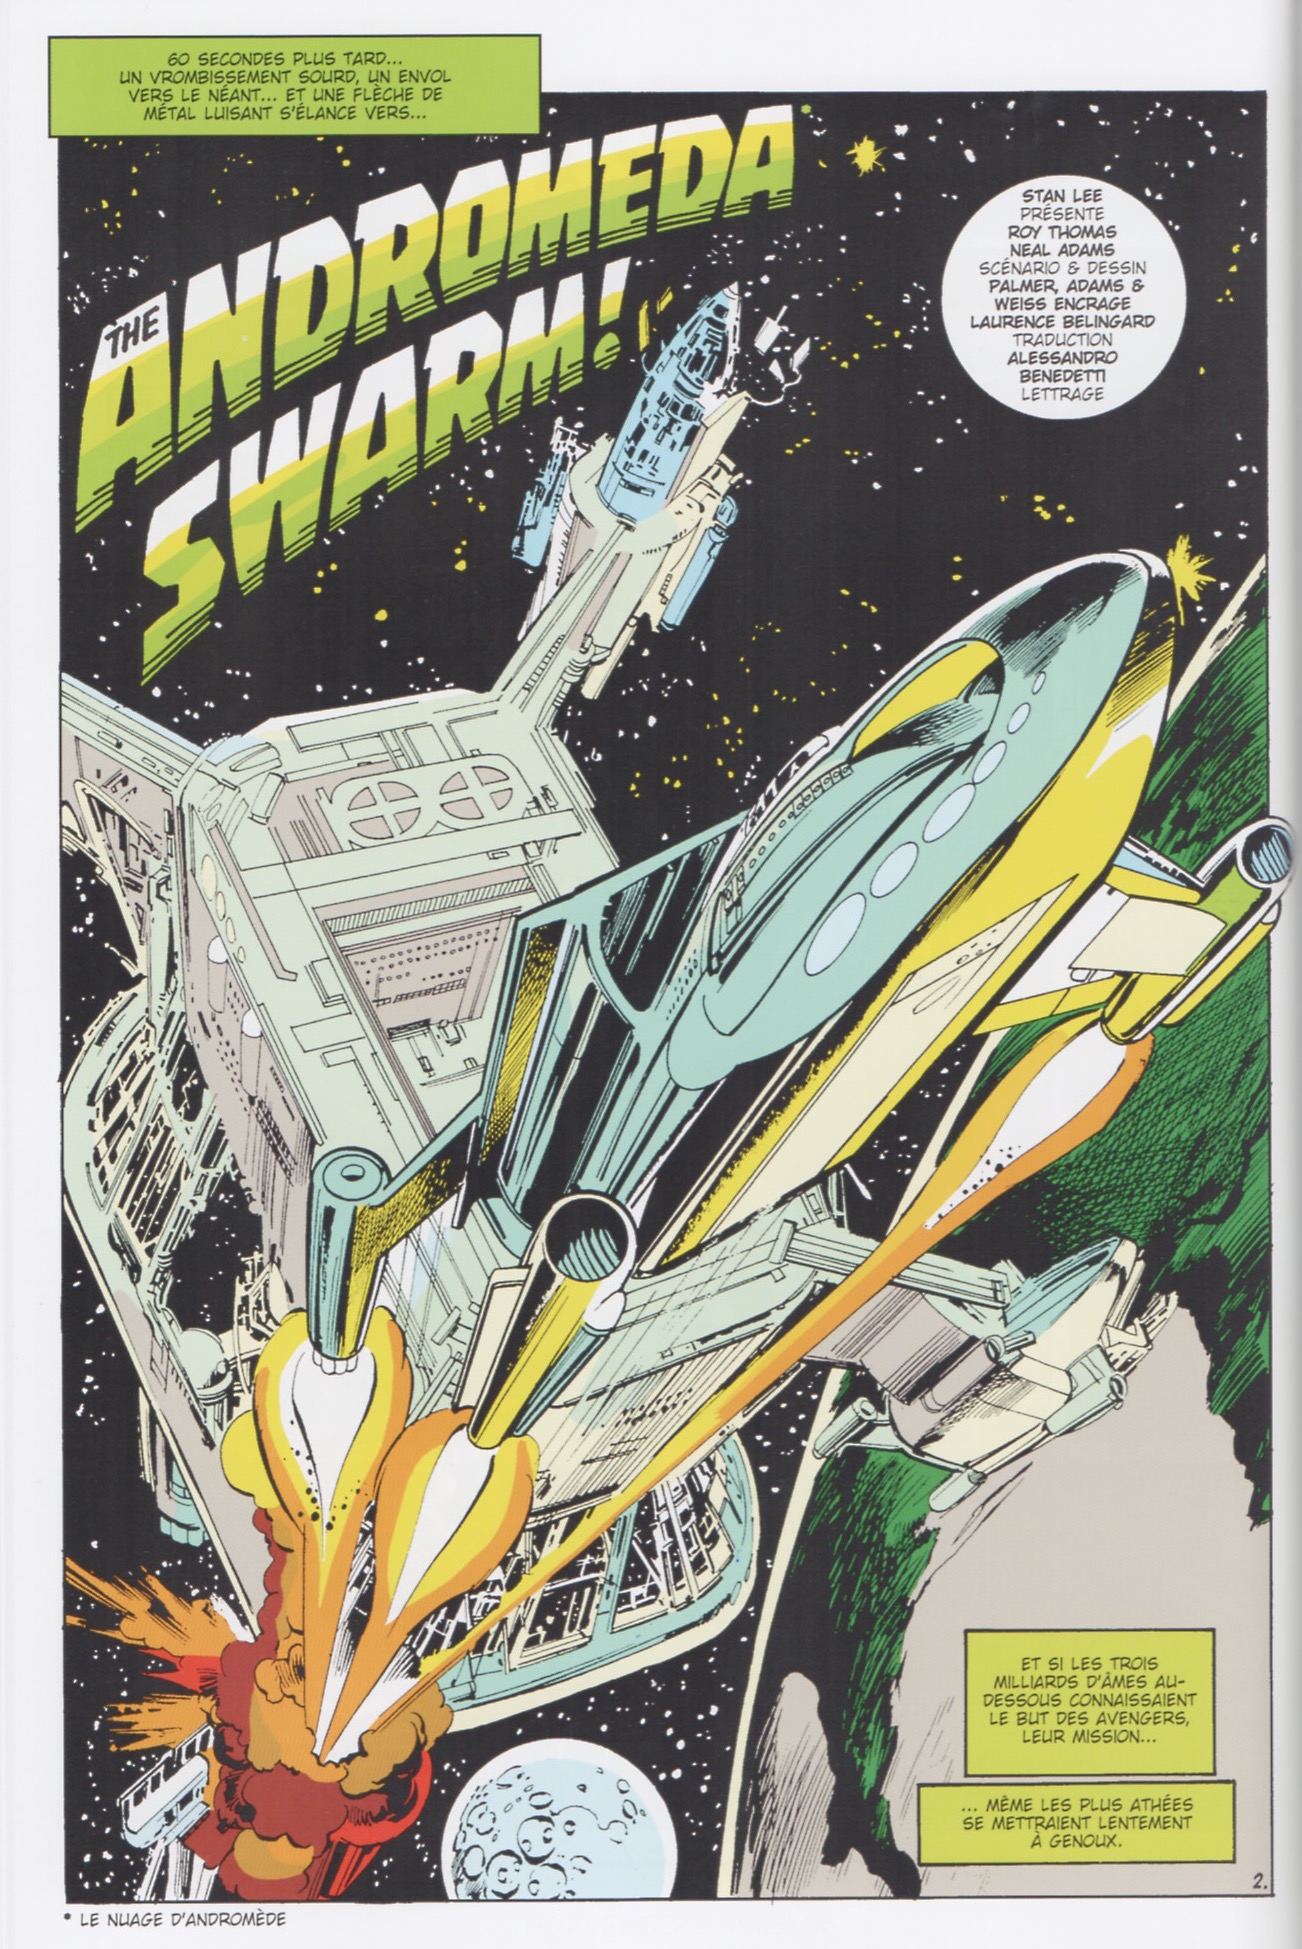 Neal Adams : a Real Space Opera !